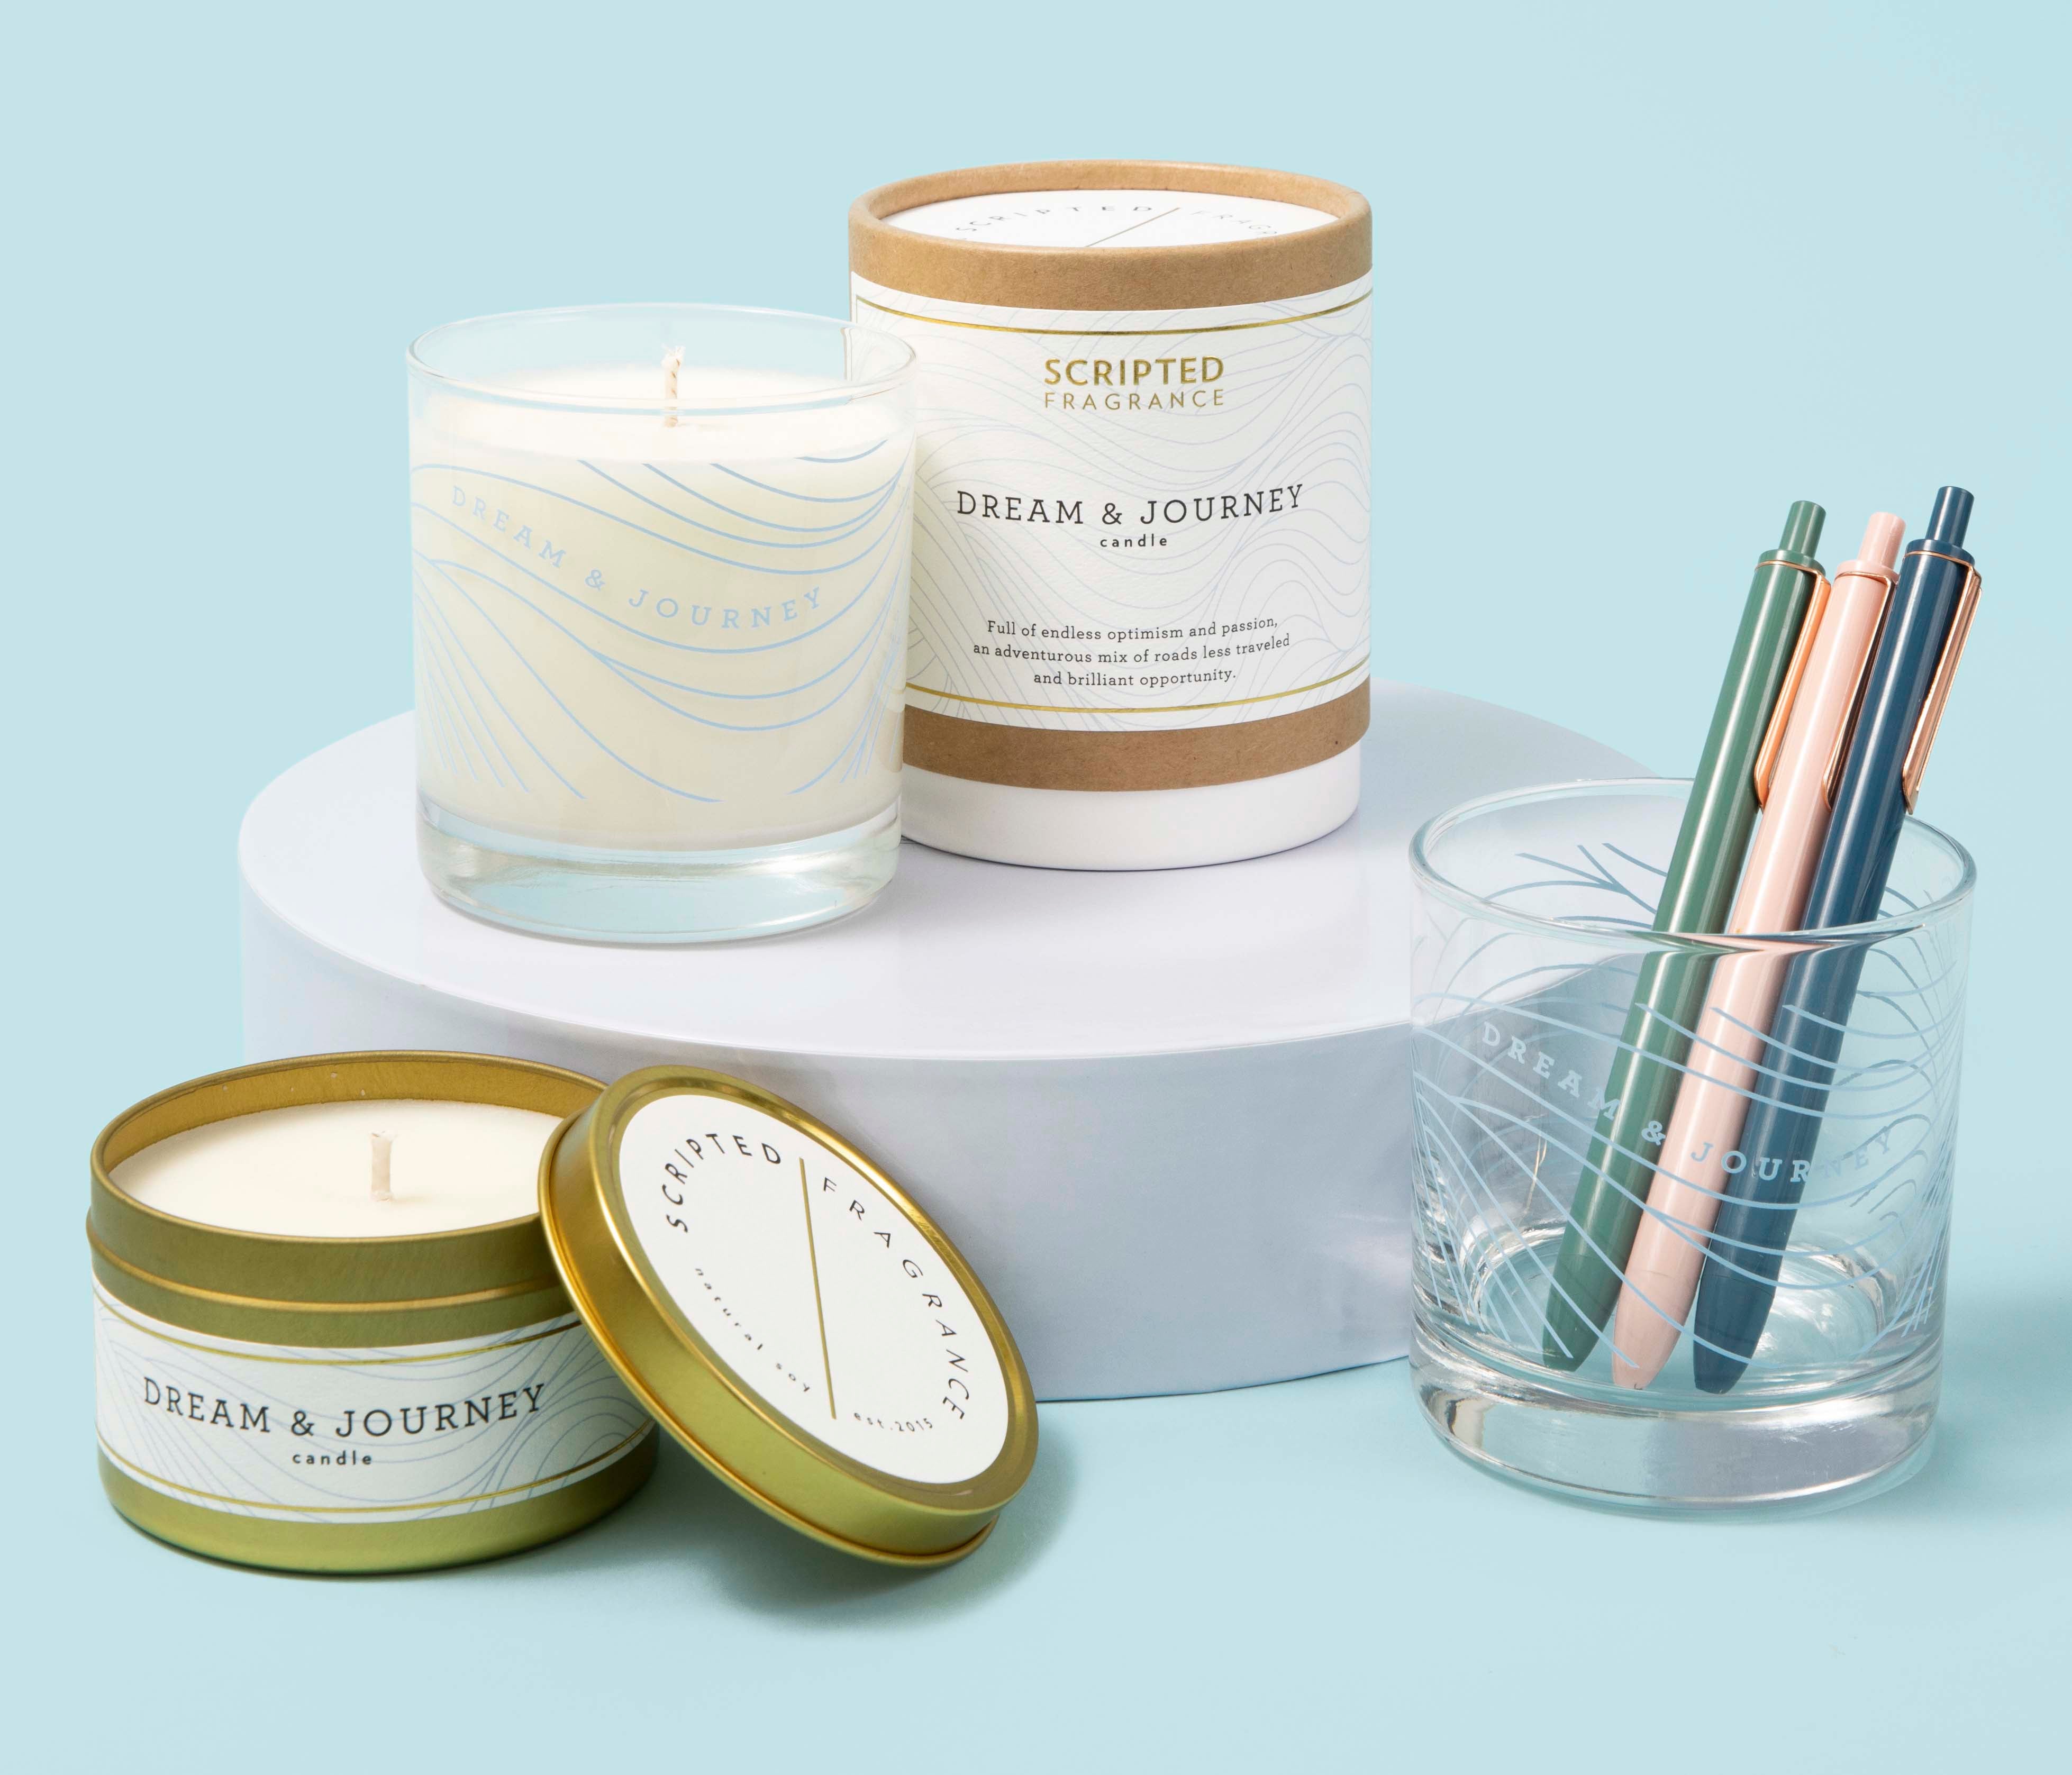 Scripted Fragrance Soy Candle Dream & Journey